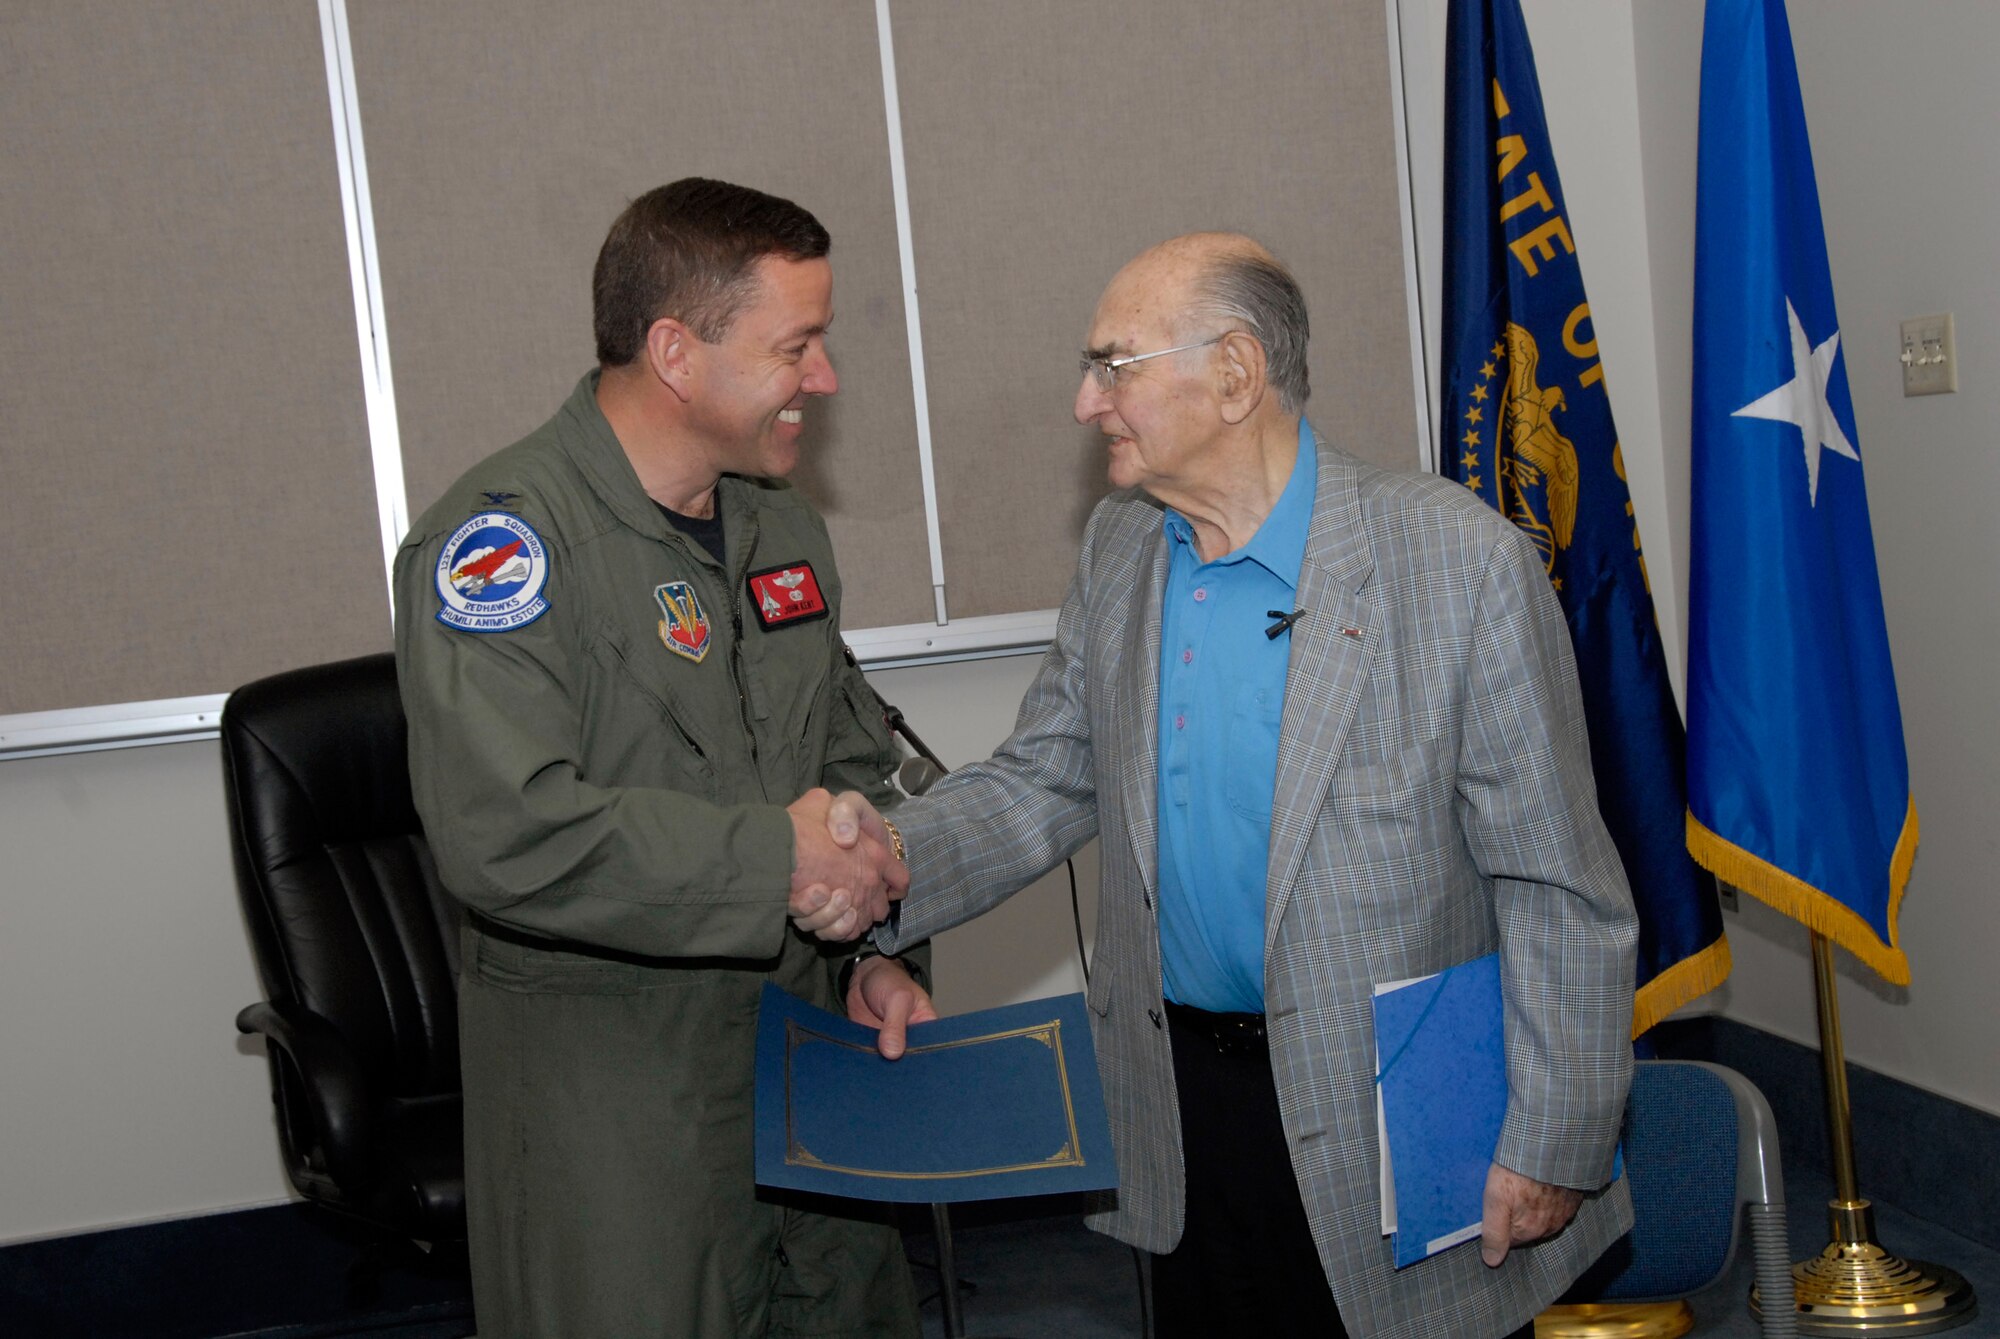 Retired Oregon Air National Guard Brigadier General Fred M. Rosenbaum, meets with Col. John Kent, commander of the 142nd Fighter Wing, following Rosenbaum's presentation on his personal experiences during the Holocaust was the focus of the wing's Diversity Council observances for Holocaust Remembrance Month. (Photo by Staff Sgt. John Hughel, Oregon Air National Guard Public Affairs)